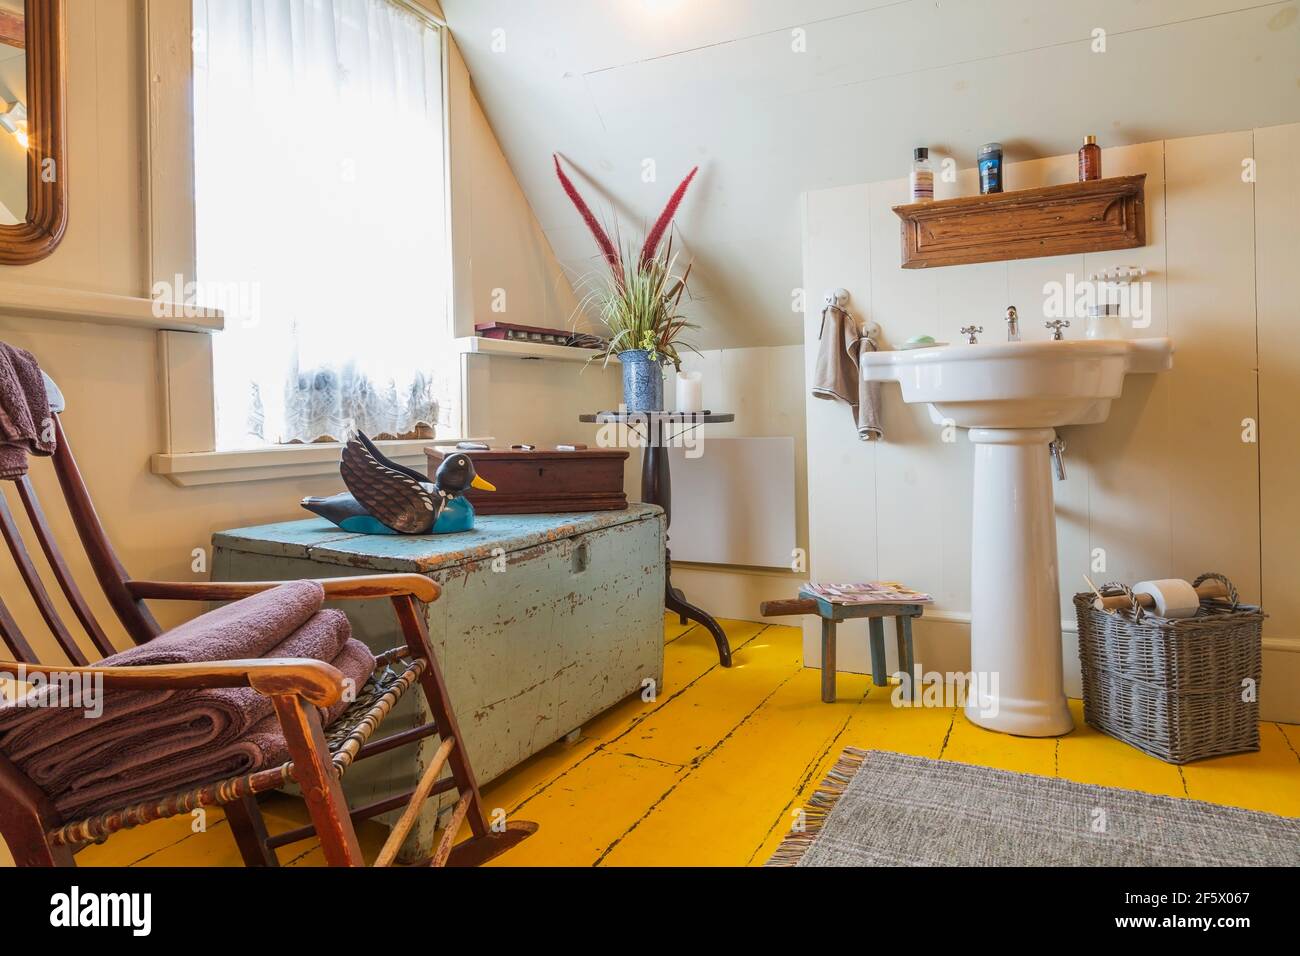 White pedestal sink, wicker basket, antique blue pine wood chest, rocking chair in bathroom on upstairs floor inside an old circa 1790 Canadiana home Stock Photo